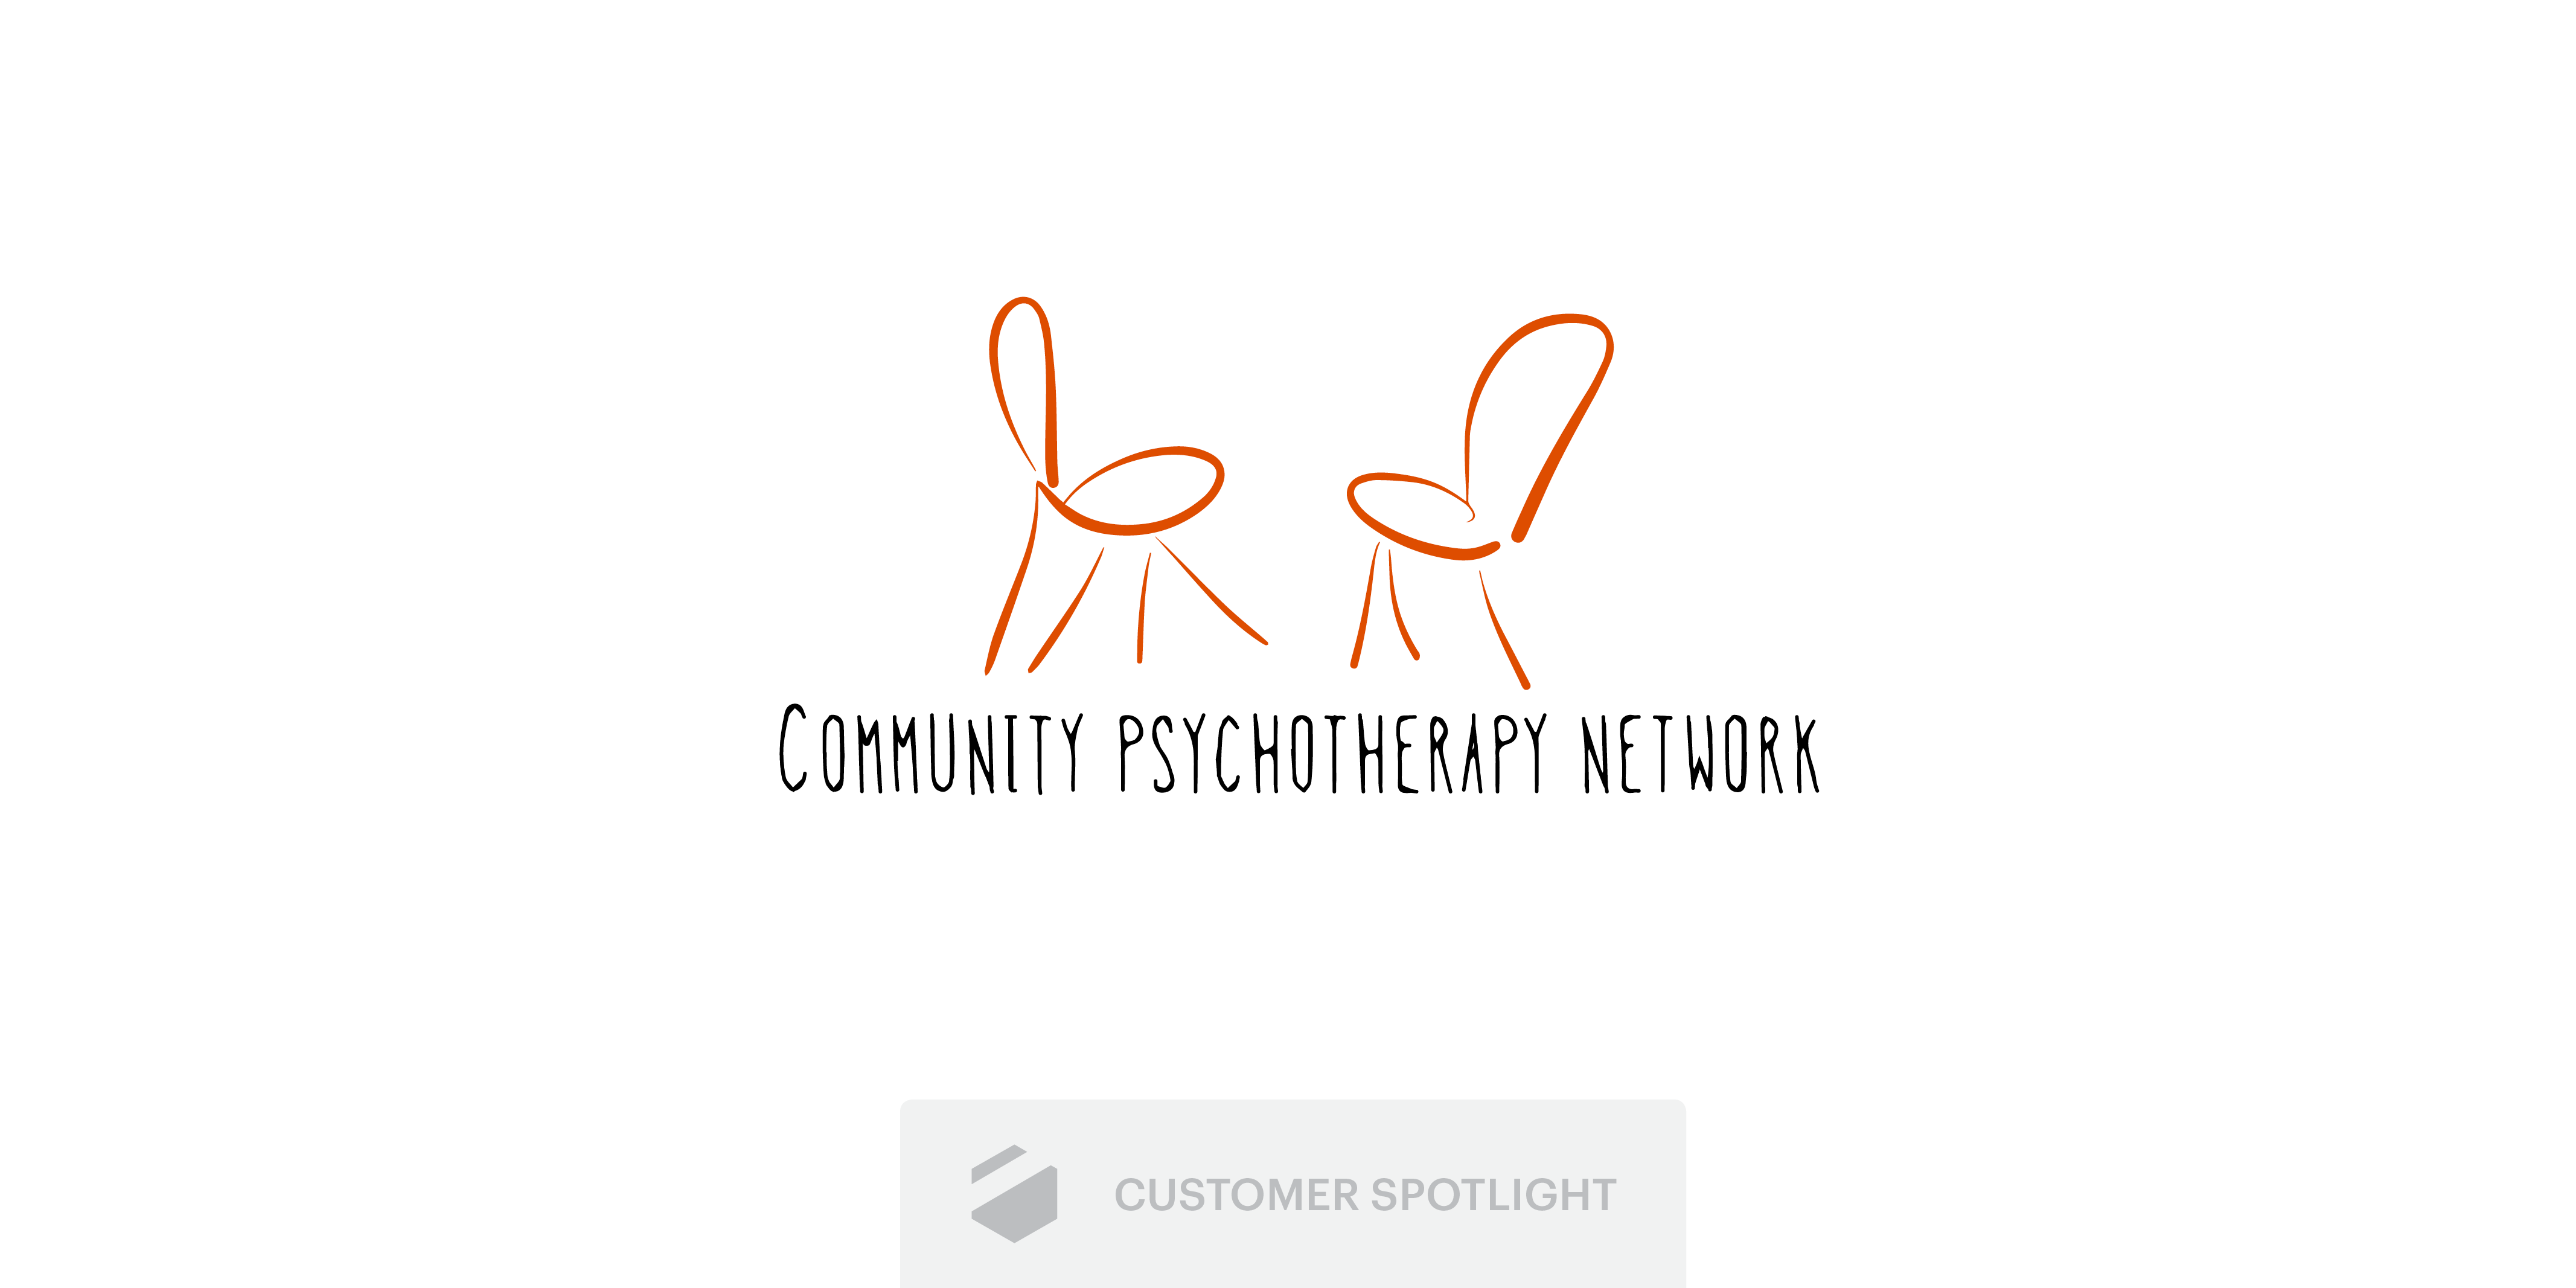 Psychotherapy Logo - The Community Psychotherapy Network protects sensitive health data